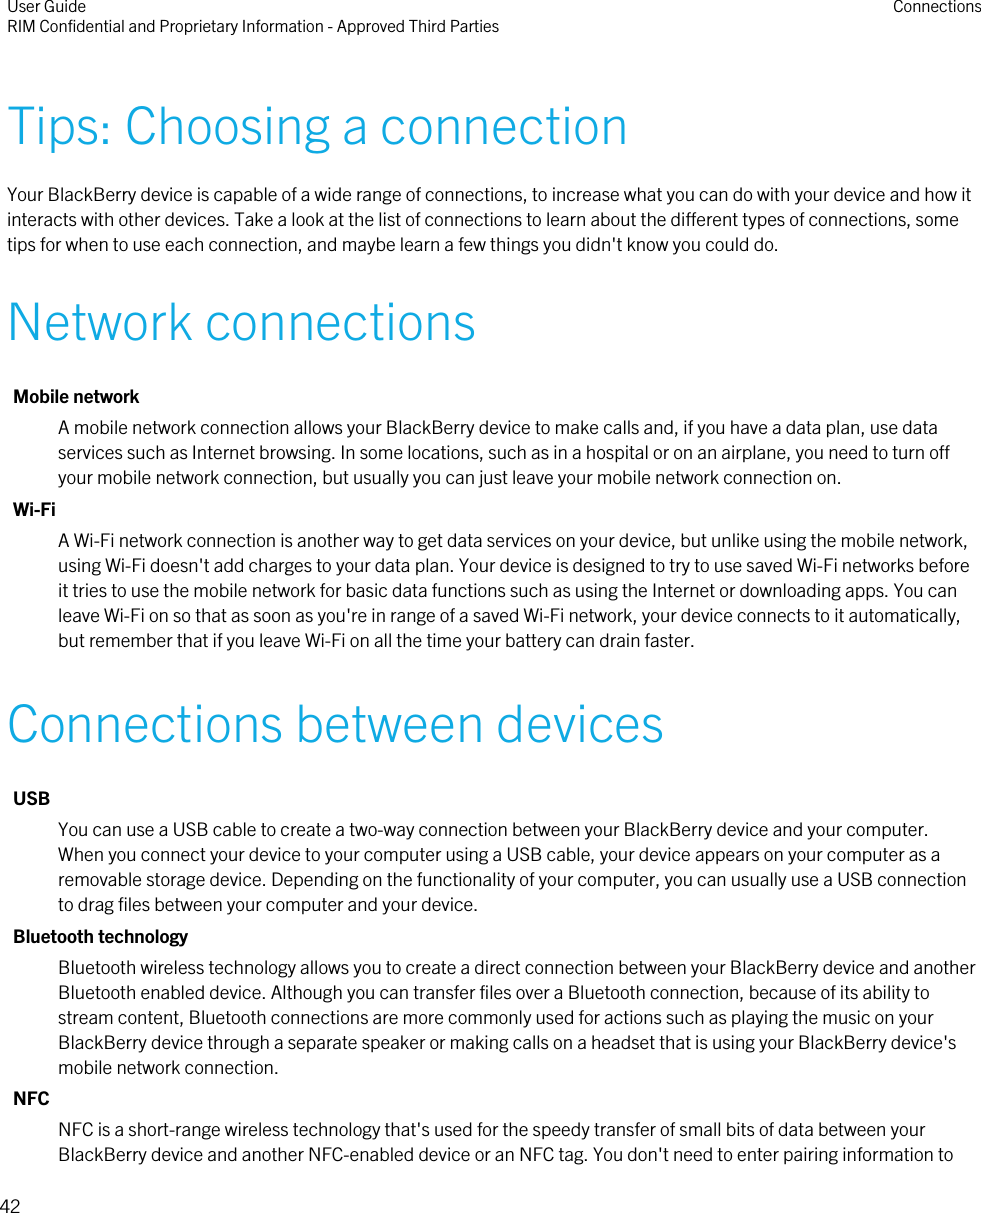 Tips: Choosing a connectionYour BlackBerry device is capable of a wide range of connections, to increase what you can do with your device and how itinteracts with other devices. Take a look at the list of connections to learn about the different types of connections, sometips for when to use each connection, and maybe learn a few things you didn&apos;t know you could do.Network connectionsMobile networkA mobile network connection allows your BlackBerry device to make calls and, if you have a data plan, use dataservices such as Internet browsing. In some locations, such as in a hospital or on an airplane, you need to turn offyour mobile network connection, but usually you can just leave your mobile network connection on.Wi-FiA Wi-Fi network connection is another way to get data services on your device, but unlike using the mobile network,using Wi-Fi doesn&apos;t add charges to your data plan. Your device is designed to try to use saved Wi-Fi networks beforeit tries to use the mobile network for basic data functions such as using the Internet or downloading apps. You canleave Wi-Fi on so that as soon as you&apos;re in range of a saved Wi-Fi network, your device connects to it automatically,but remember that if you leave Wi-Fi on all the time your battery can drain faster.Connections between devicesUSBYou can use a USB cable to create a two-way connection between your BlackBerry device and your computer.When you connect your device to your computer using a USB cable, your device appears on your computer as aremovable storage device. Depending on the functionality of your computer, you can usually use a USB connectionto drag files between your computer and your device.Bluetooth technologyBluetooth wireless technology allows you to create a direct connection between your BlackBerry device and anotherBluetooth enabled device. Although you can transfer files over a Bluetooth connection, because of its ability tostream content, Bluetooth connections are more commonly used for actions such as playing the music on yourBlackBerry device through a separate speaker or making calls on a headset that is using your BlackBerry device&apos;smobile network connection.NFCNFC is a short-range wireless technology that&apos;s used for the speedy transfer of small bits of data between yourBlackBerry device and another NFC-enabled device or an NFC tag. You don&apos;t need to enter pairing information toUser GuideRIM Confidential and Proprietary Information - Approved Third Parties Connections42